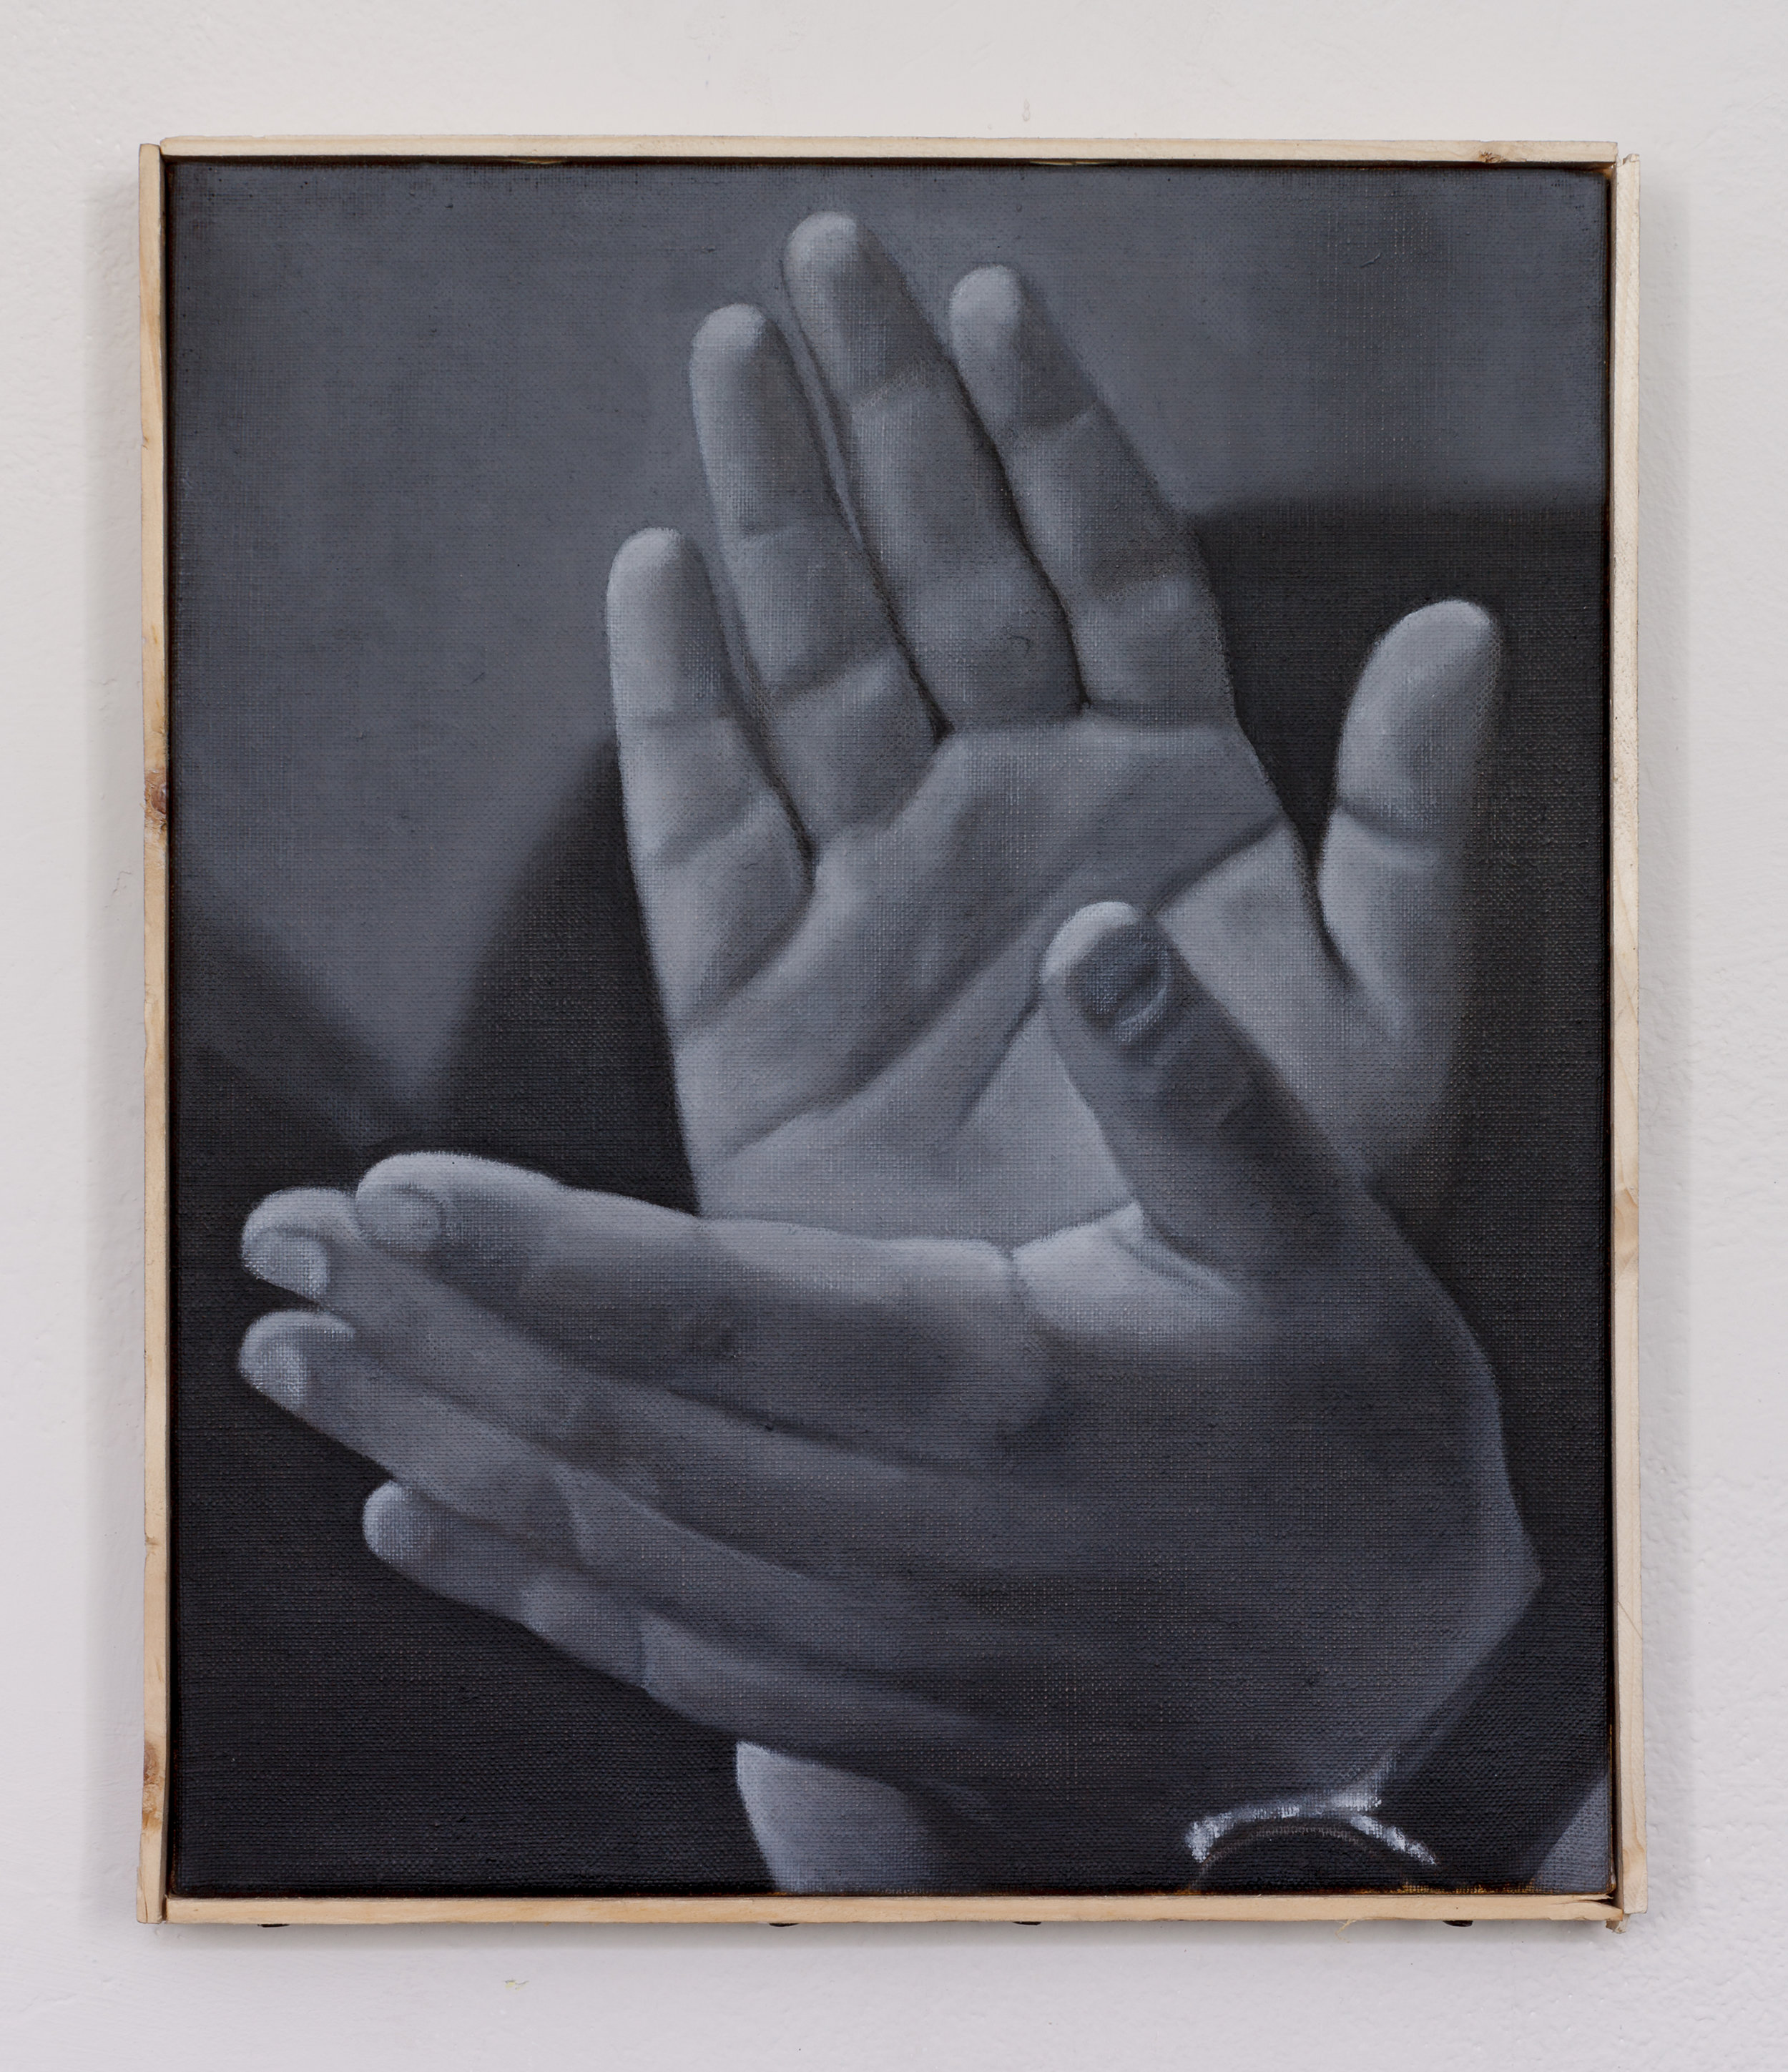  Hand clap | oil on linen | 30 x 25cm | Photo by Lee Welch             